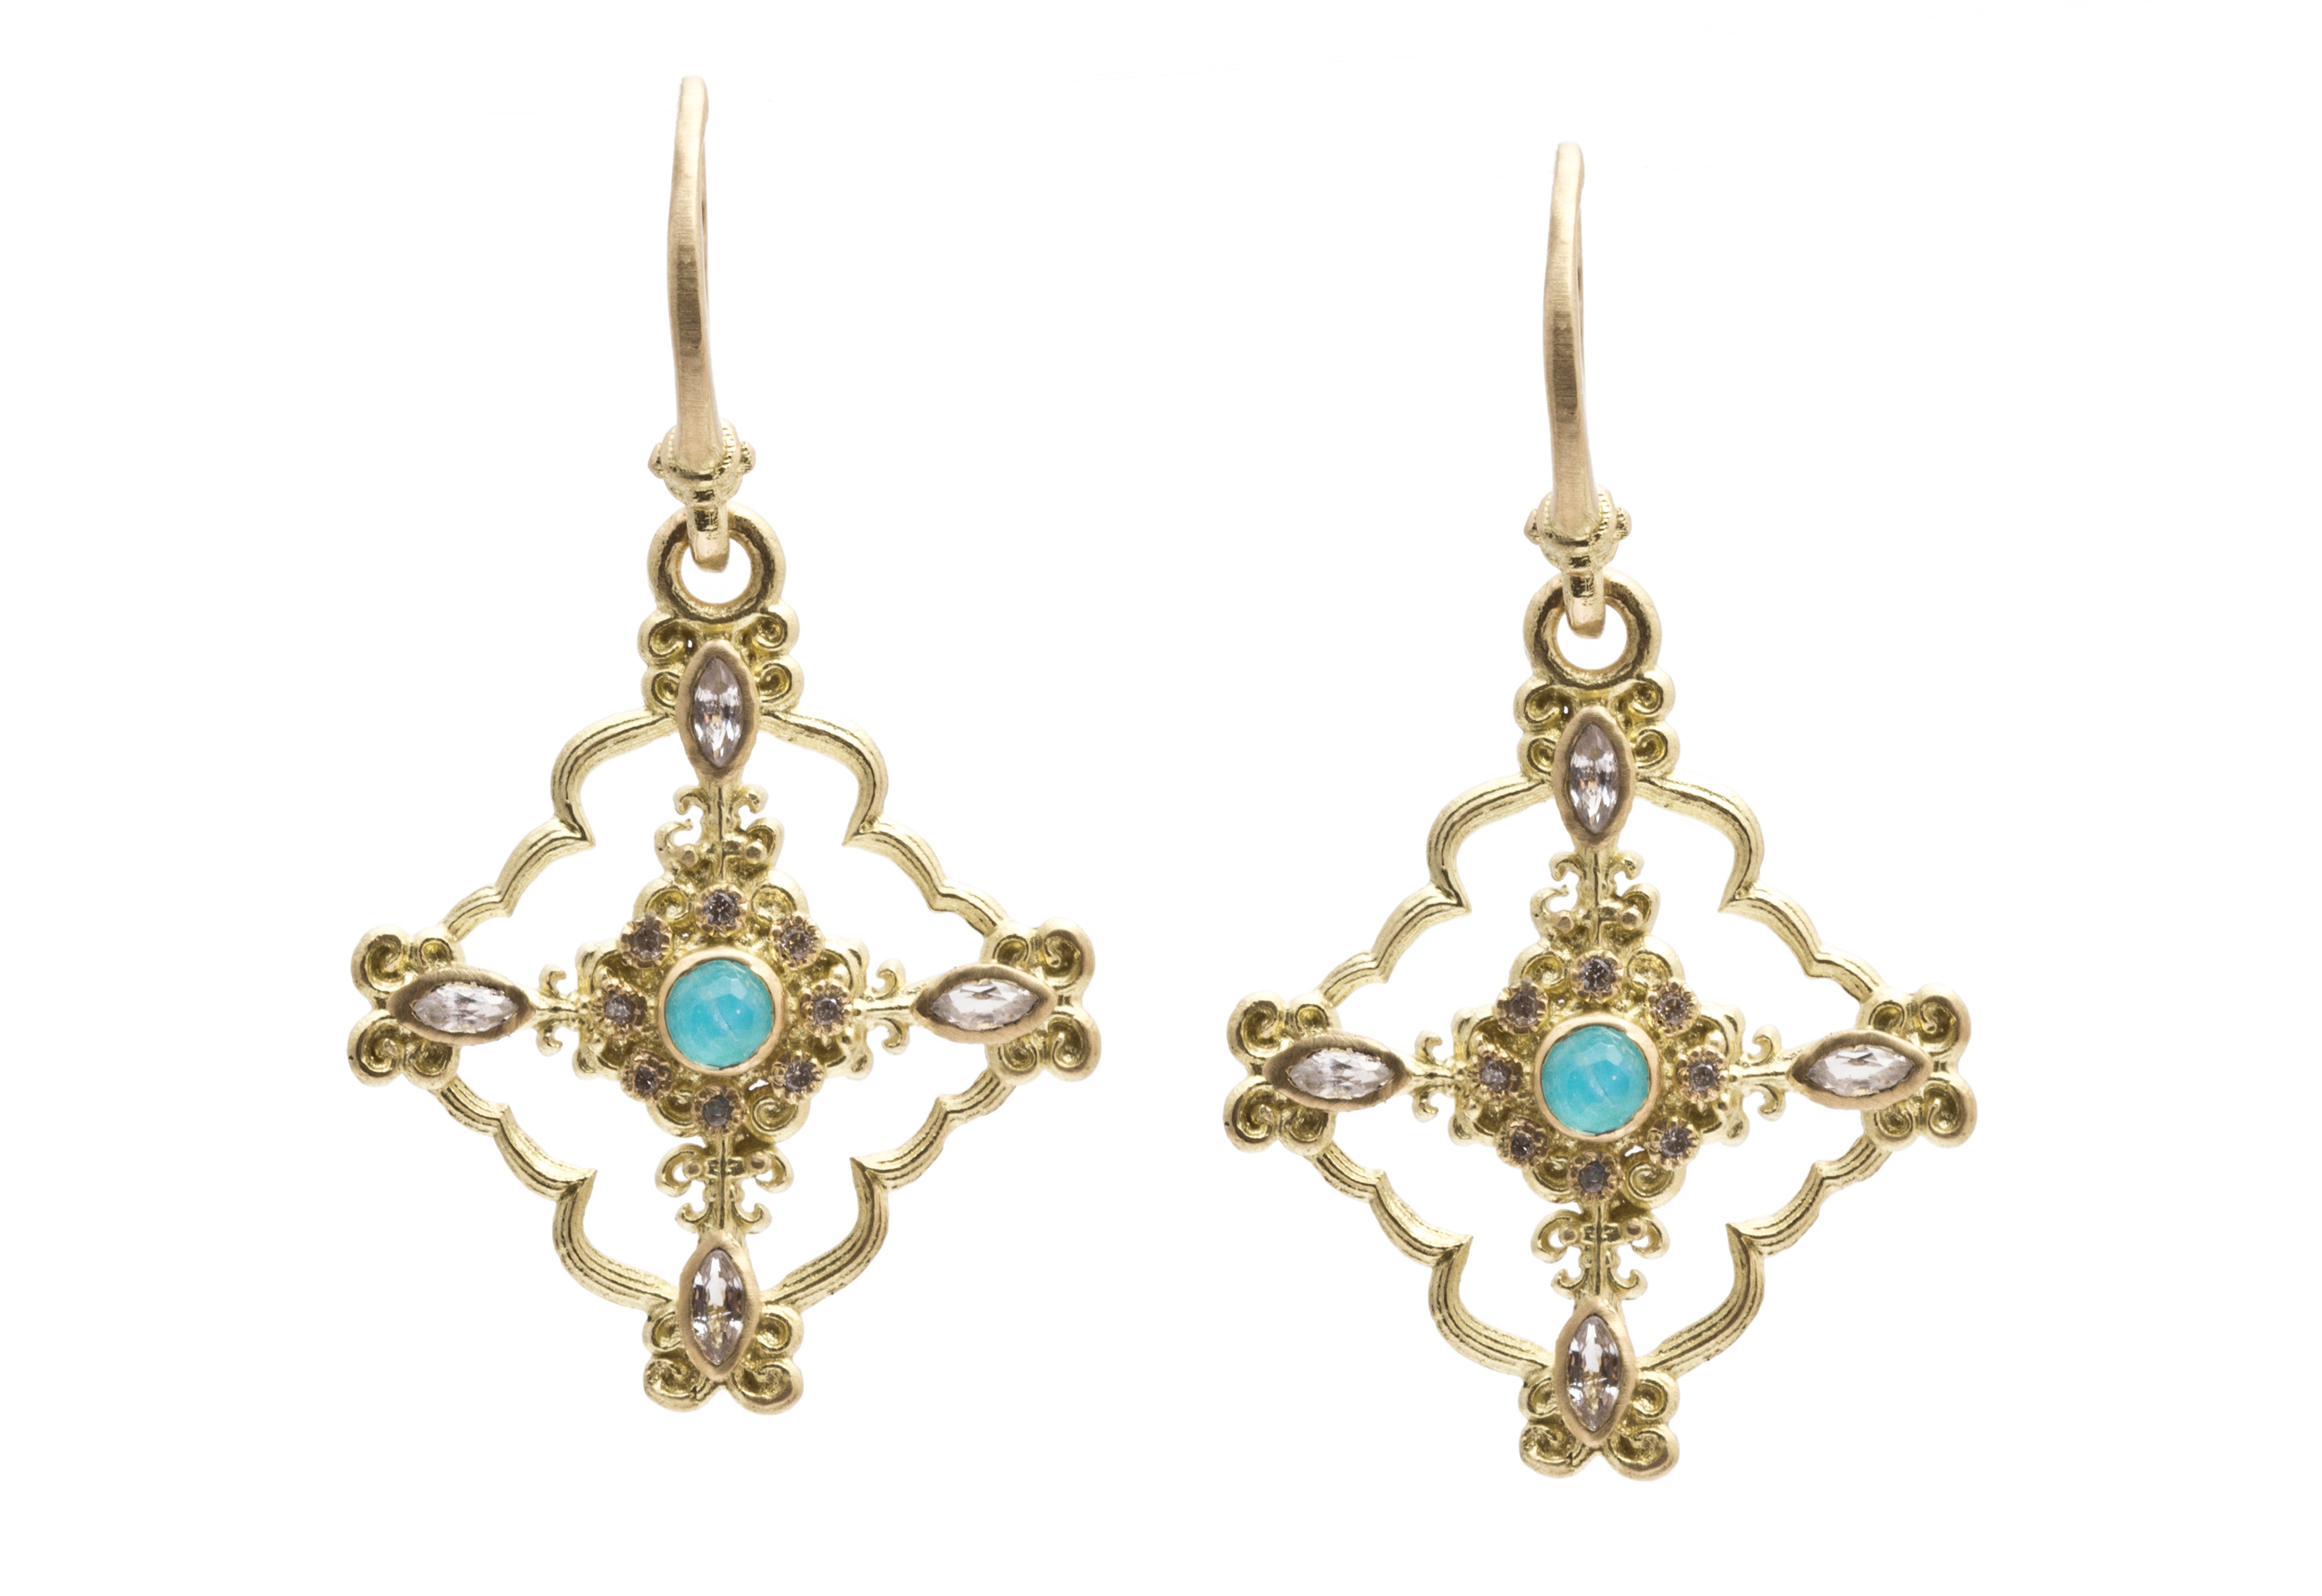 ARMENTA 18K YELLOW GOLD DIAMOND, SAPPHIRE AND MOONSTONE/TURQUOISE DOUBLET EARRINGS 08522